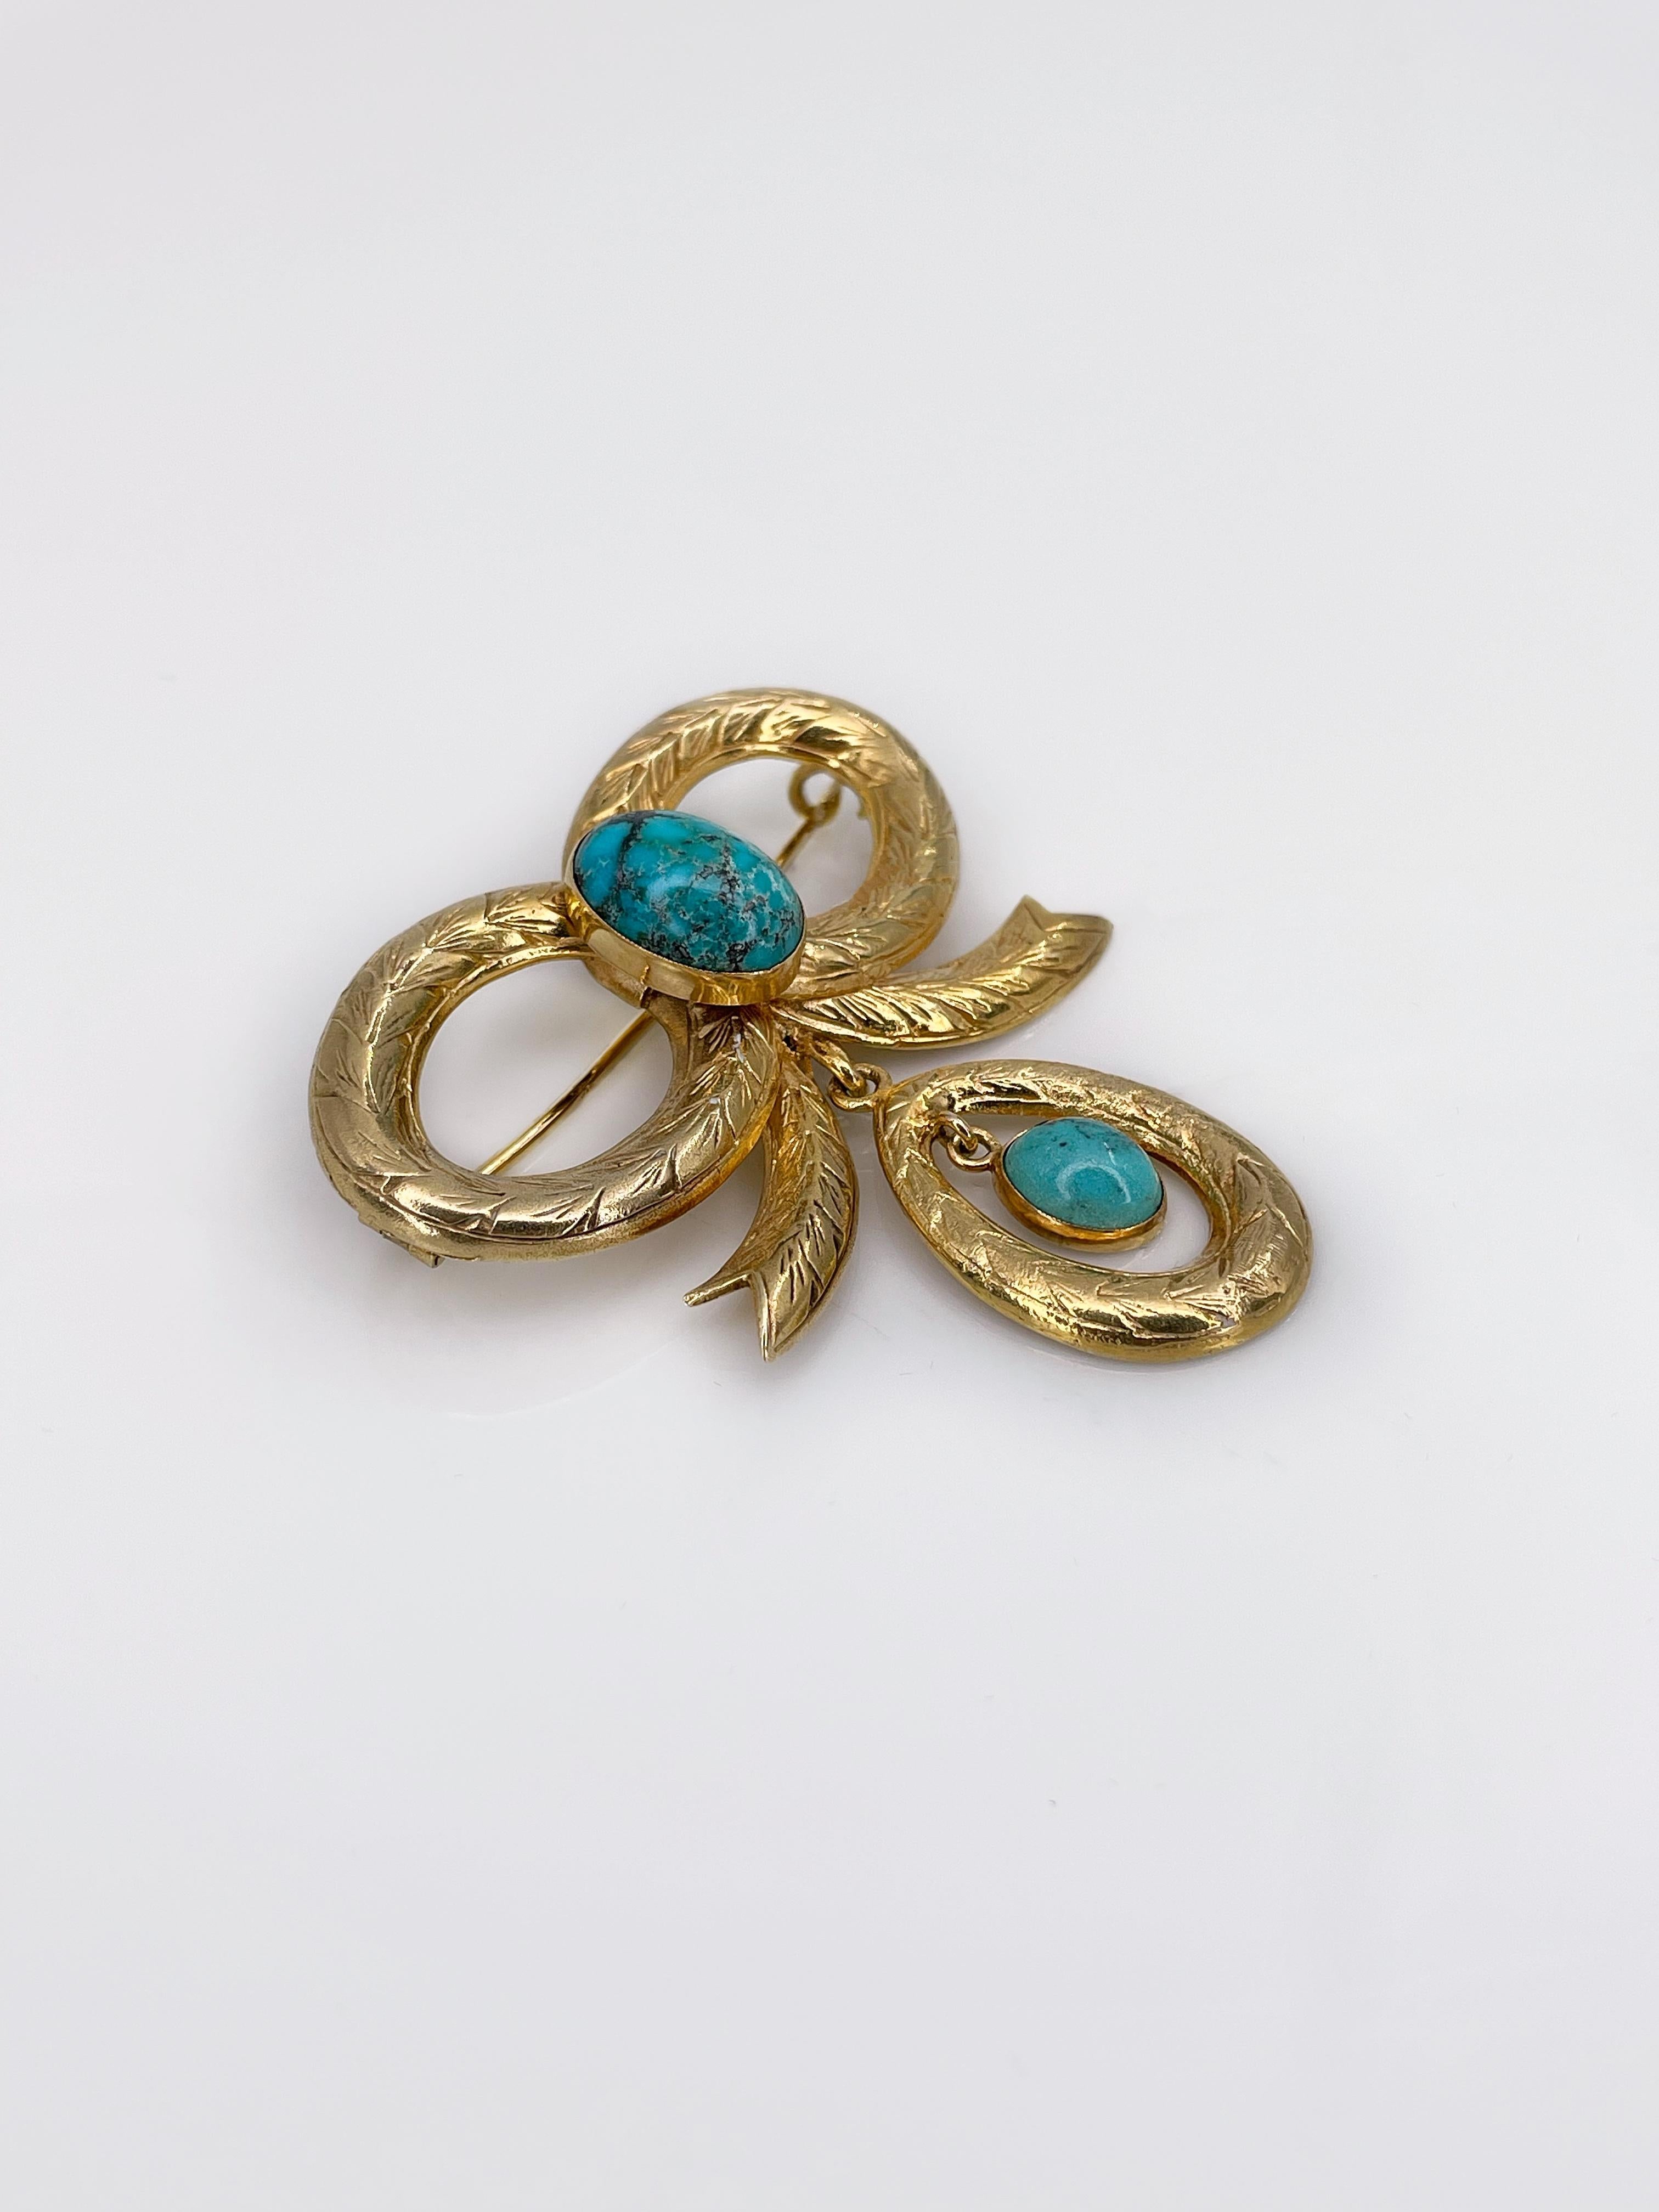 Romantic antique bow design engraved chandelier brooch in 9ct gold. It features two cabochon cut turquoises.



Size: 5,3x5,2cm

Weight: 17,43g

